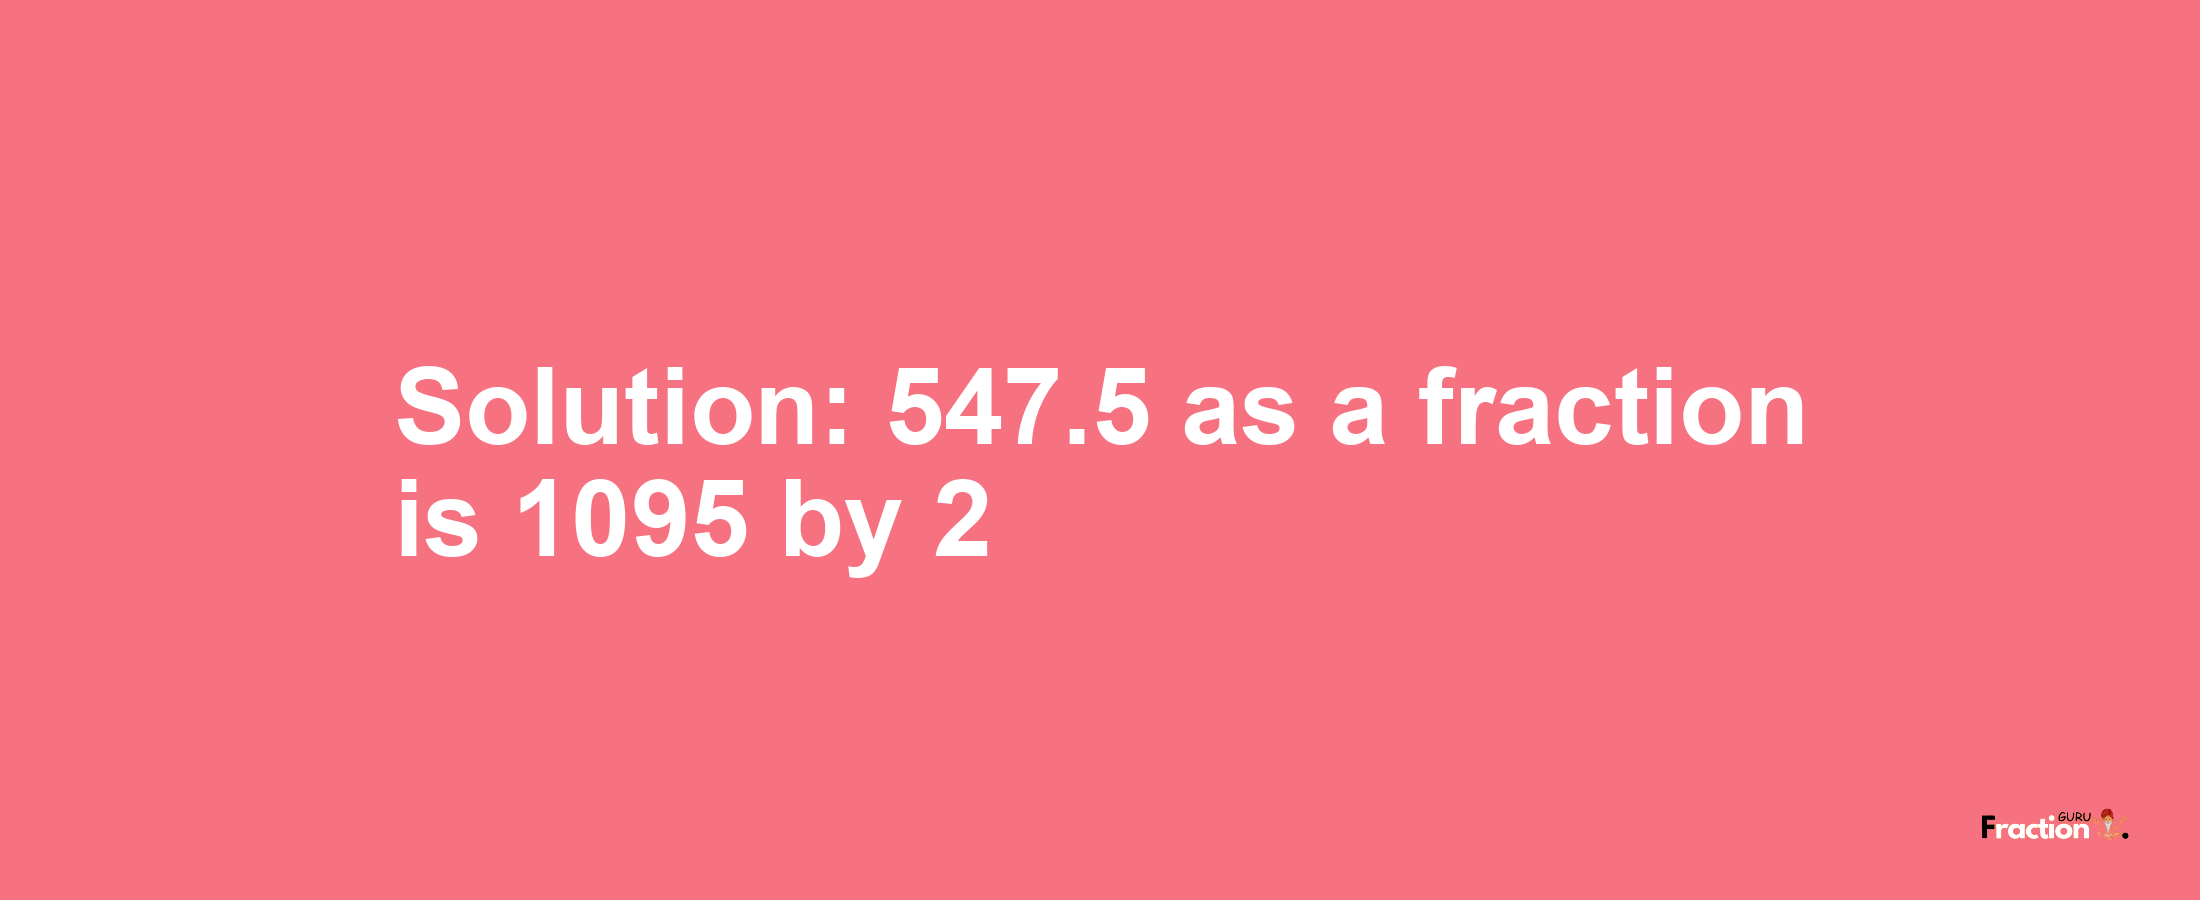 Solution:547.5 as a fraction is 1095/2